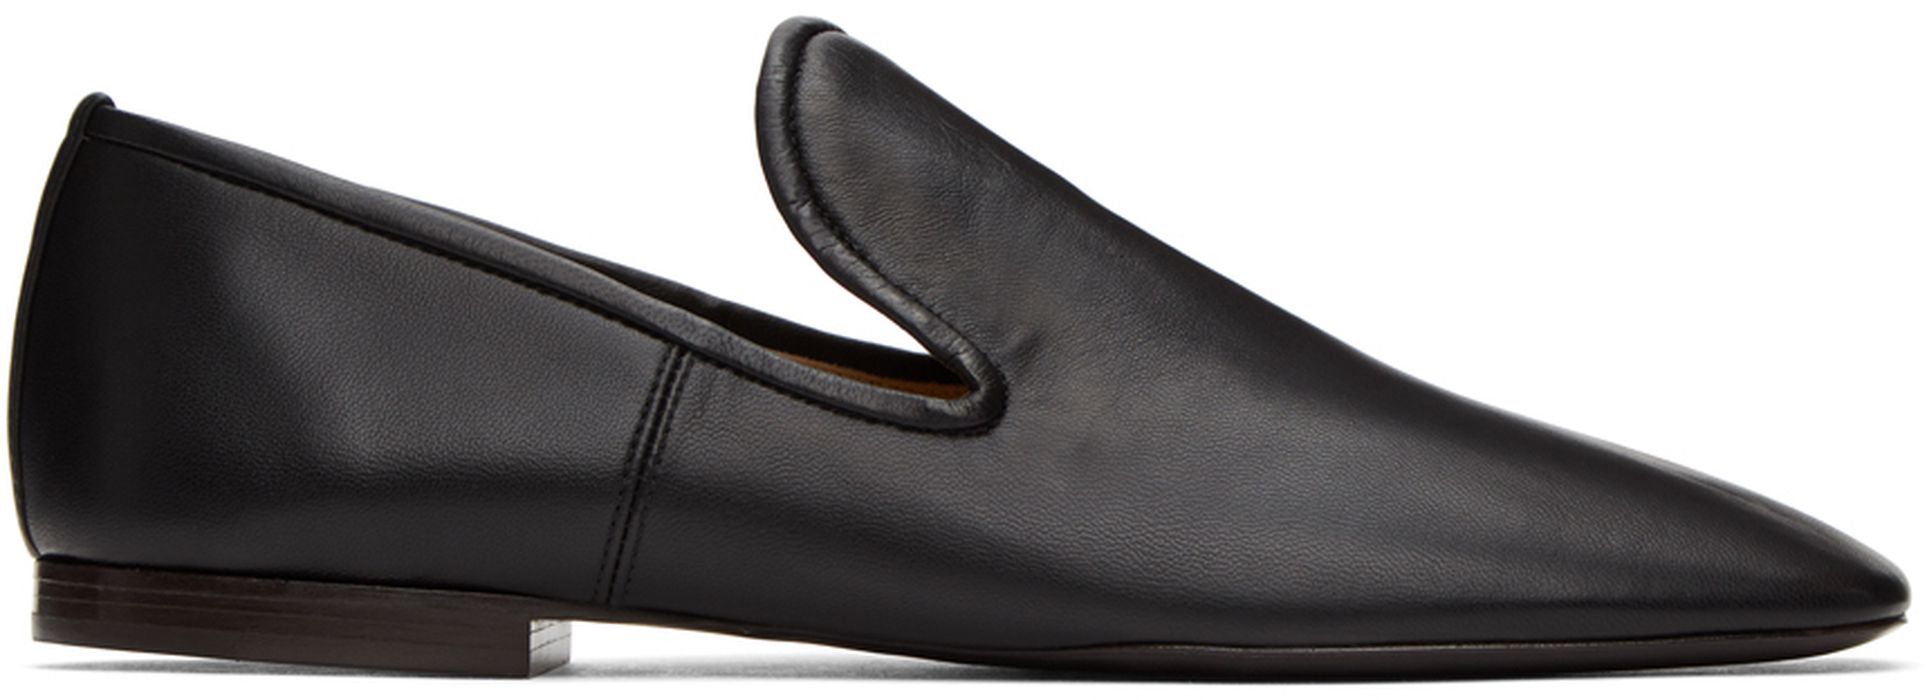 Lemaire Black Soft Loafers